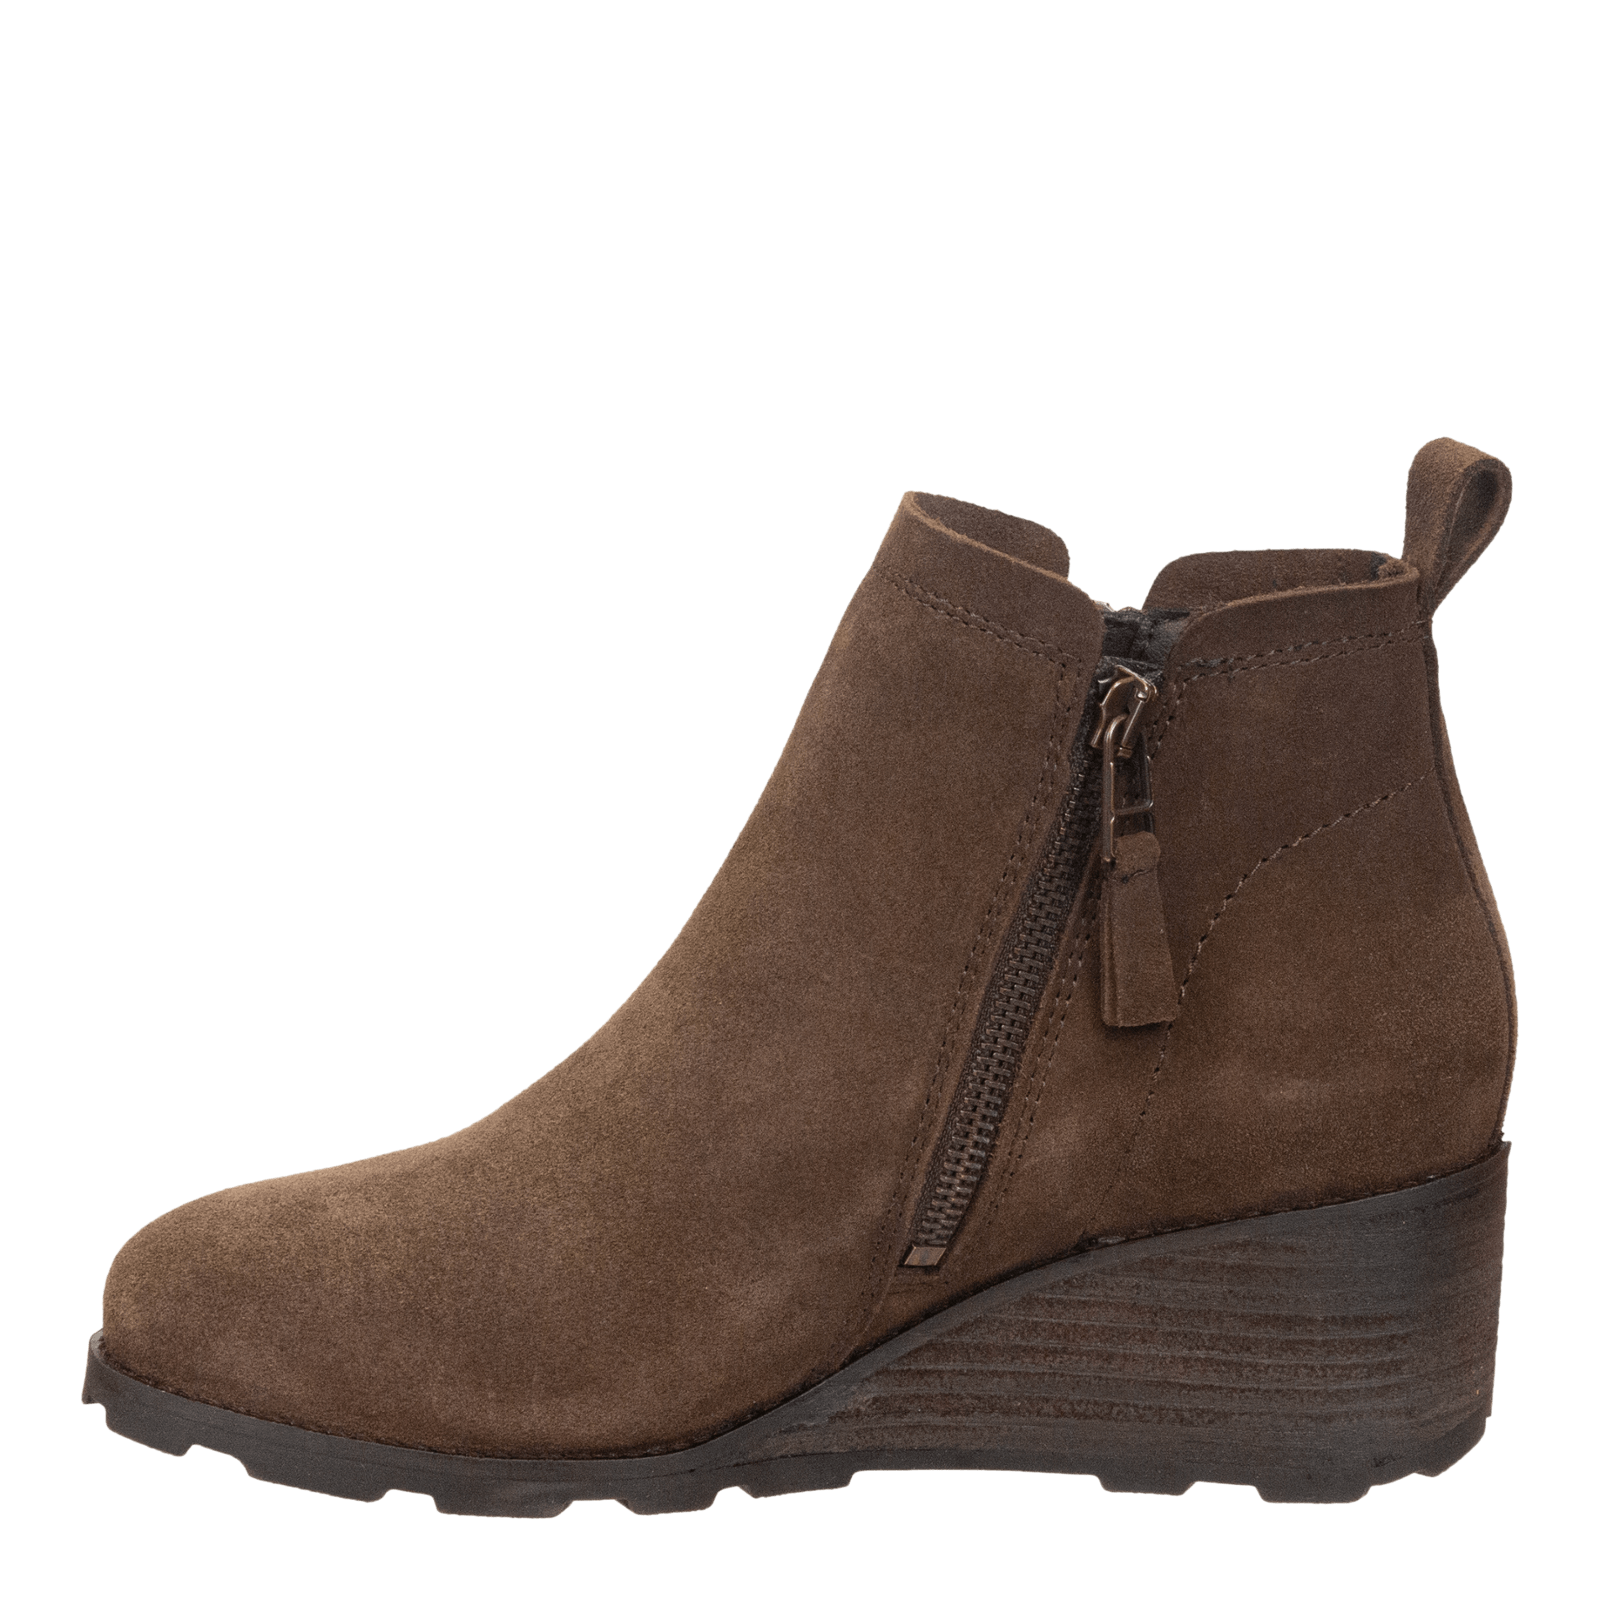 STORY in BROWN Wedge Ankle Boots